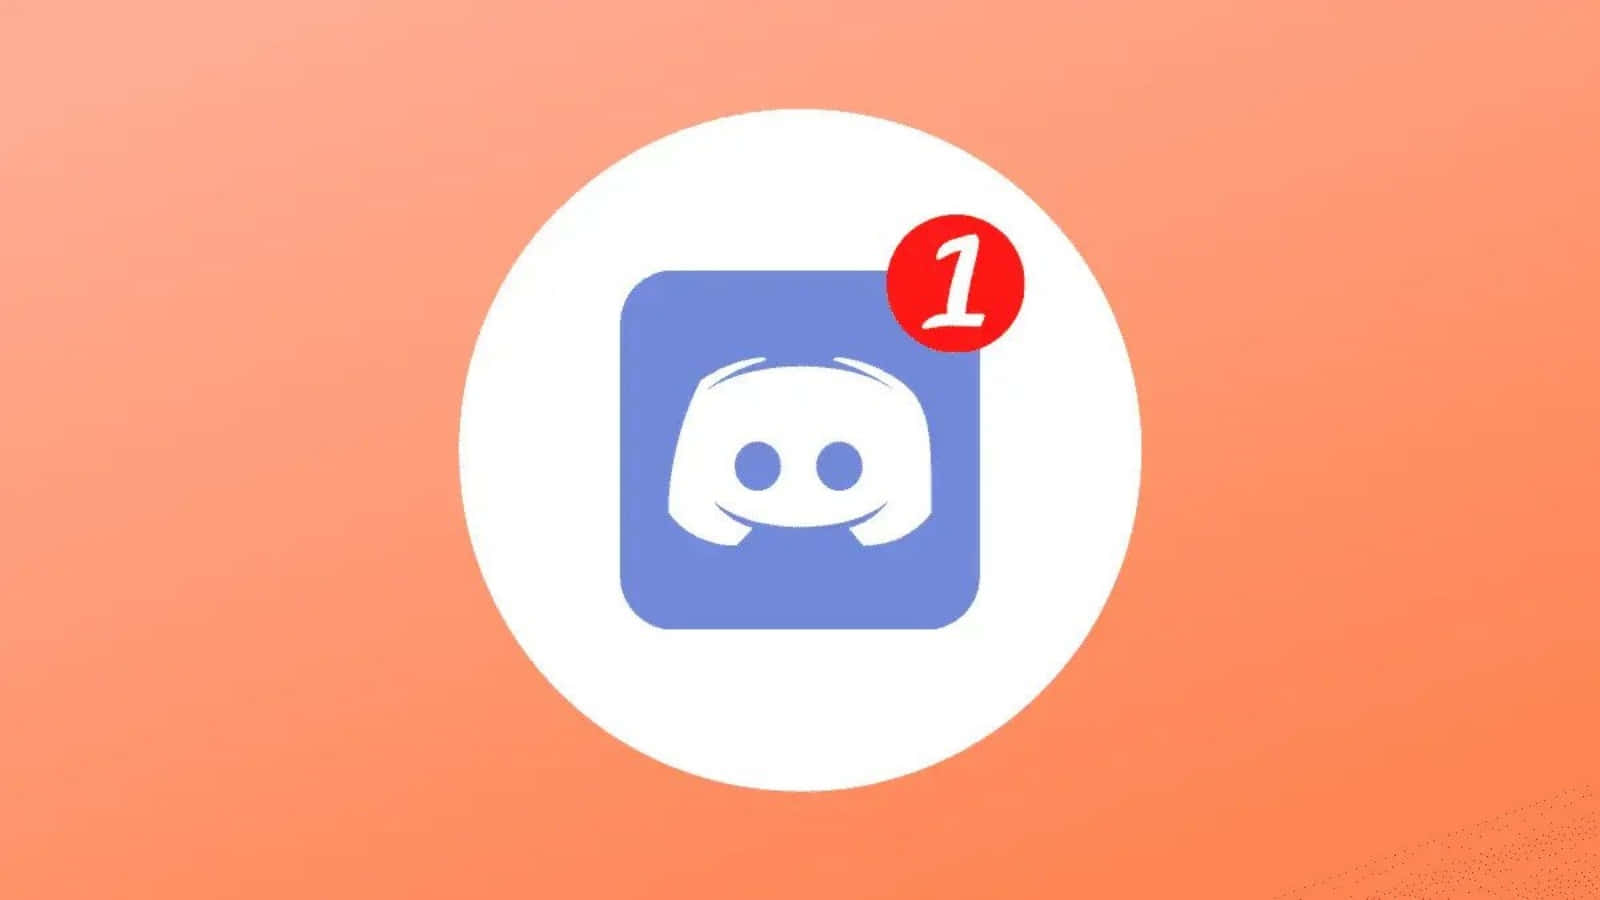 Experience a seamless communication on Discord